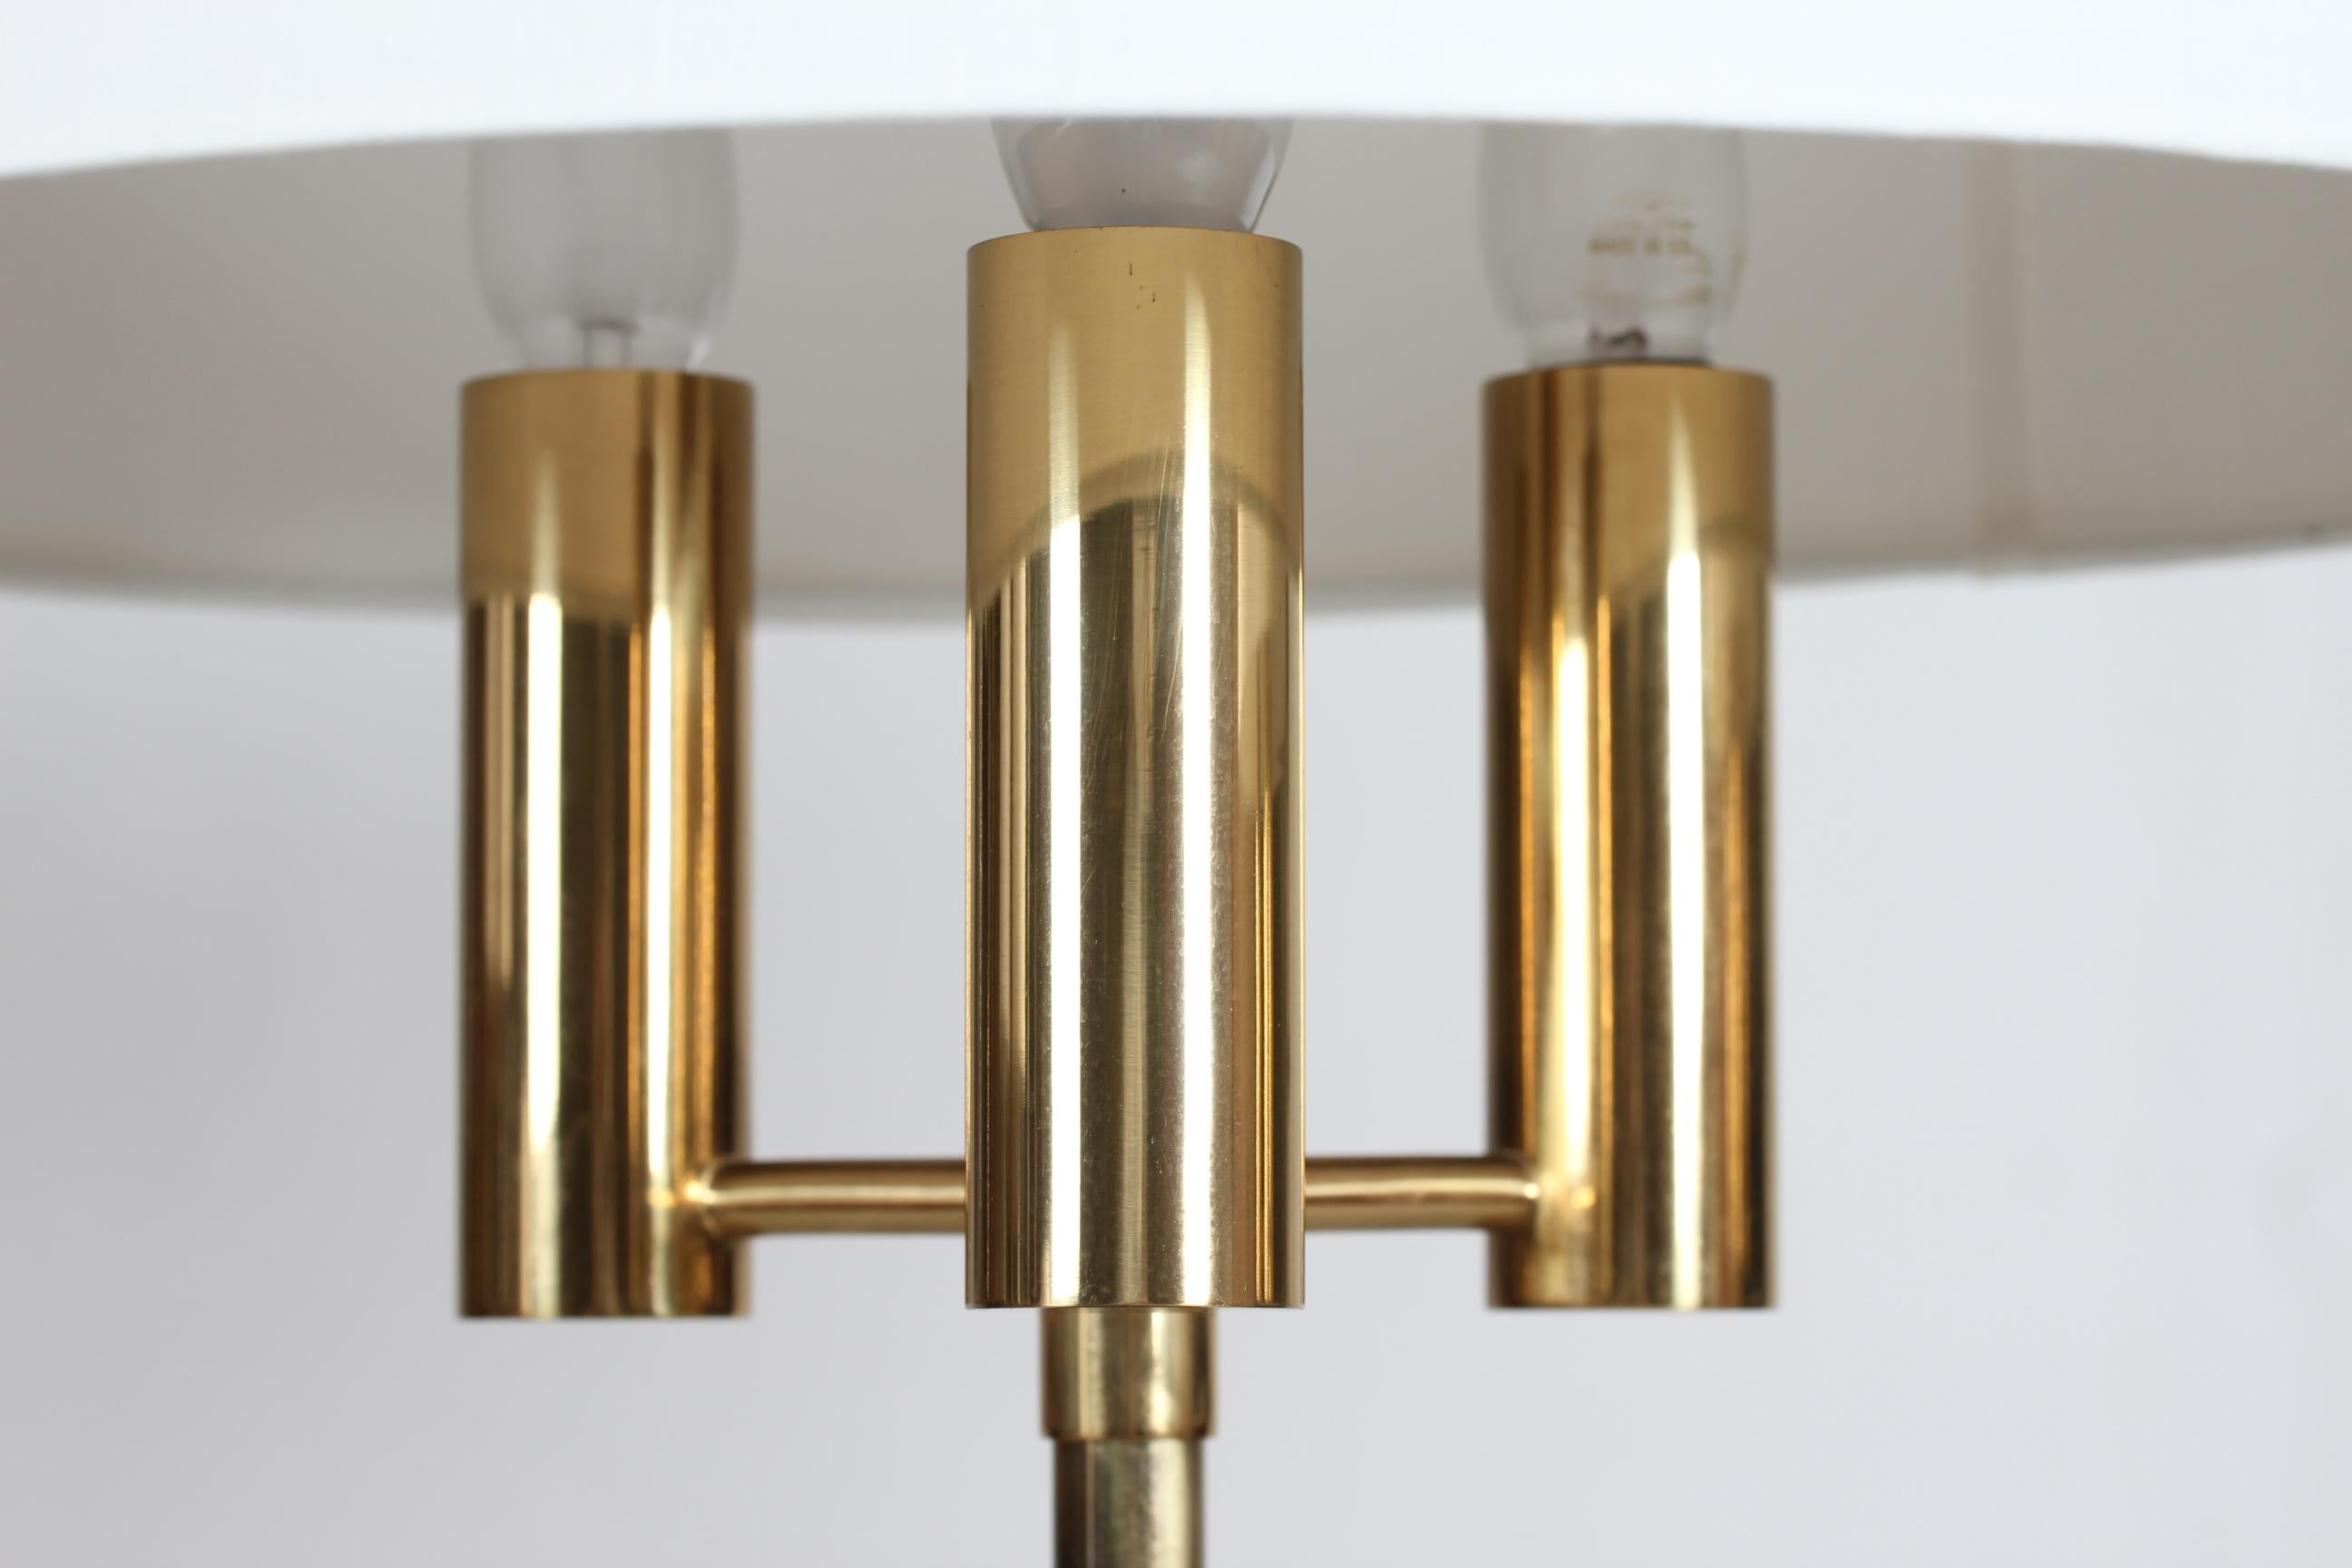 Svend Aage Holm Sørensen Style Pair of Danish Modern Floor Lamps of Brass 1960s For Sale 1